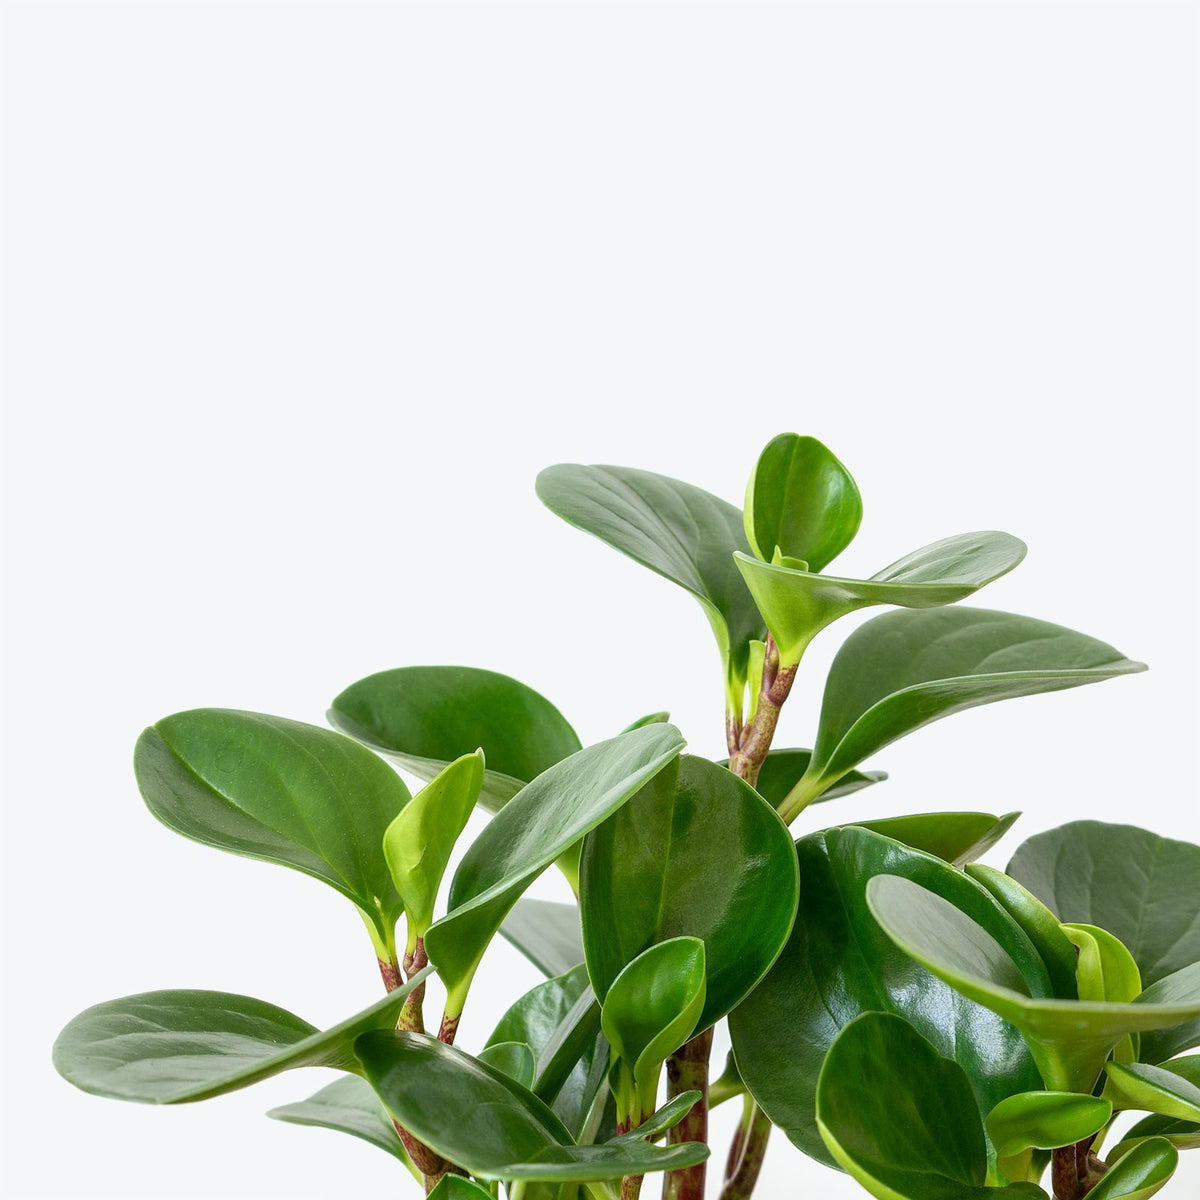 Peperomia Obtusifolia - Top 10 Best Indoor House Plants for Your Home - House Plants Delivery Toronto - JOMO Studio